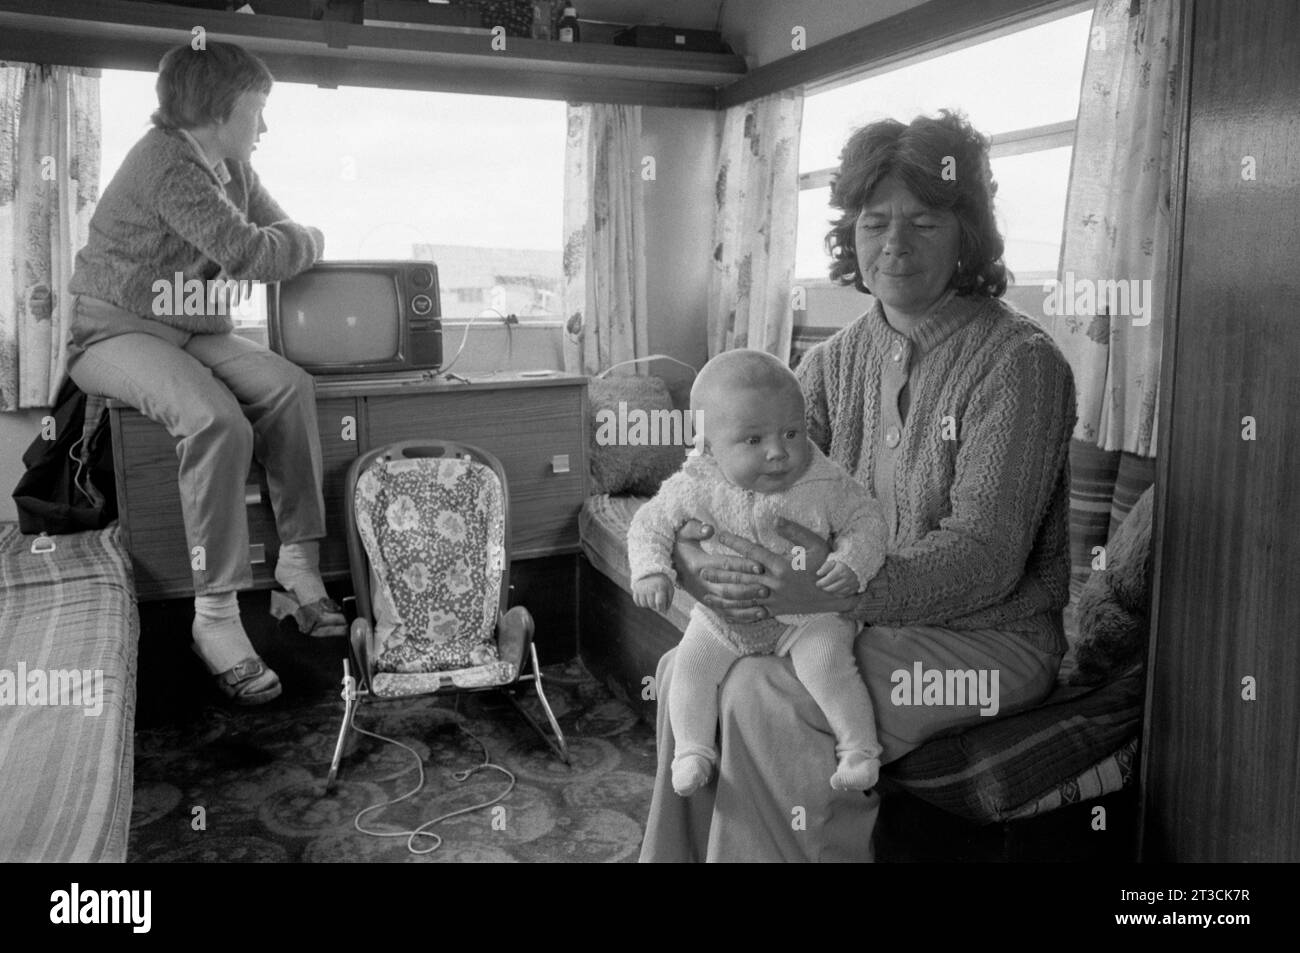 Gypsy grandmother and baby granddaughter, interior of caravan with TV set. Appleby in Westmorland gypsy horse fair Cumbria, England circa June 1981 1980s UK HOMER SYKES Stock Photo